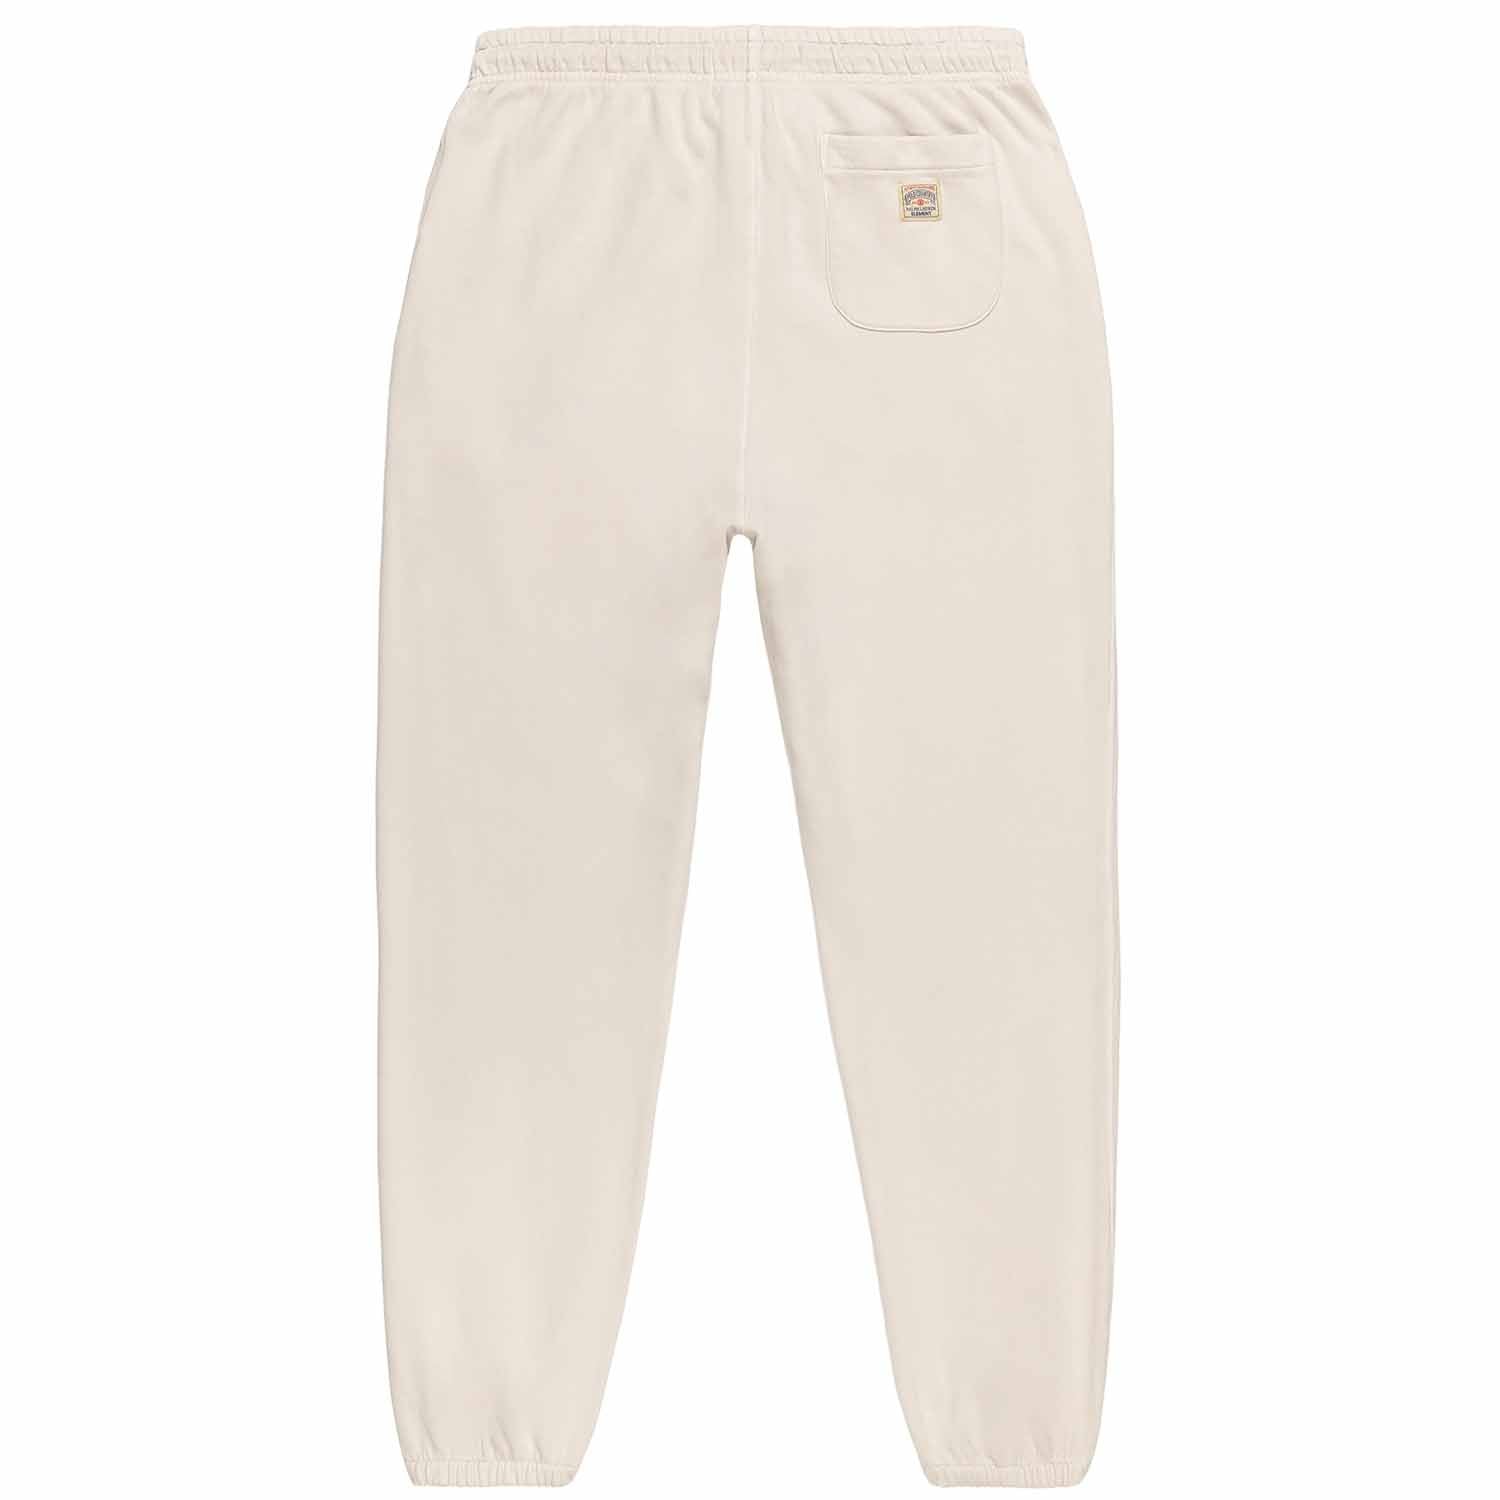 Polo Ralph Lauren x Element Sweatpants in cream with draw string and elastic in ankles.